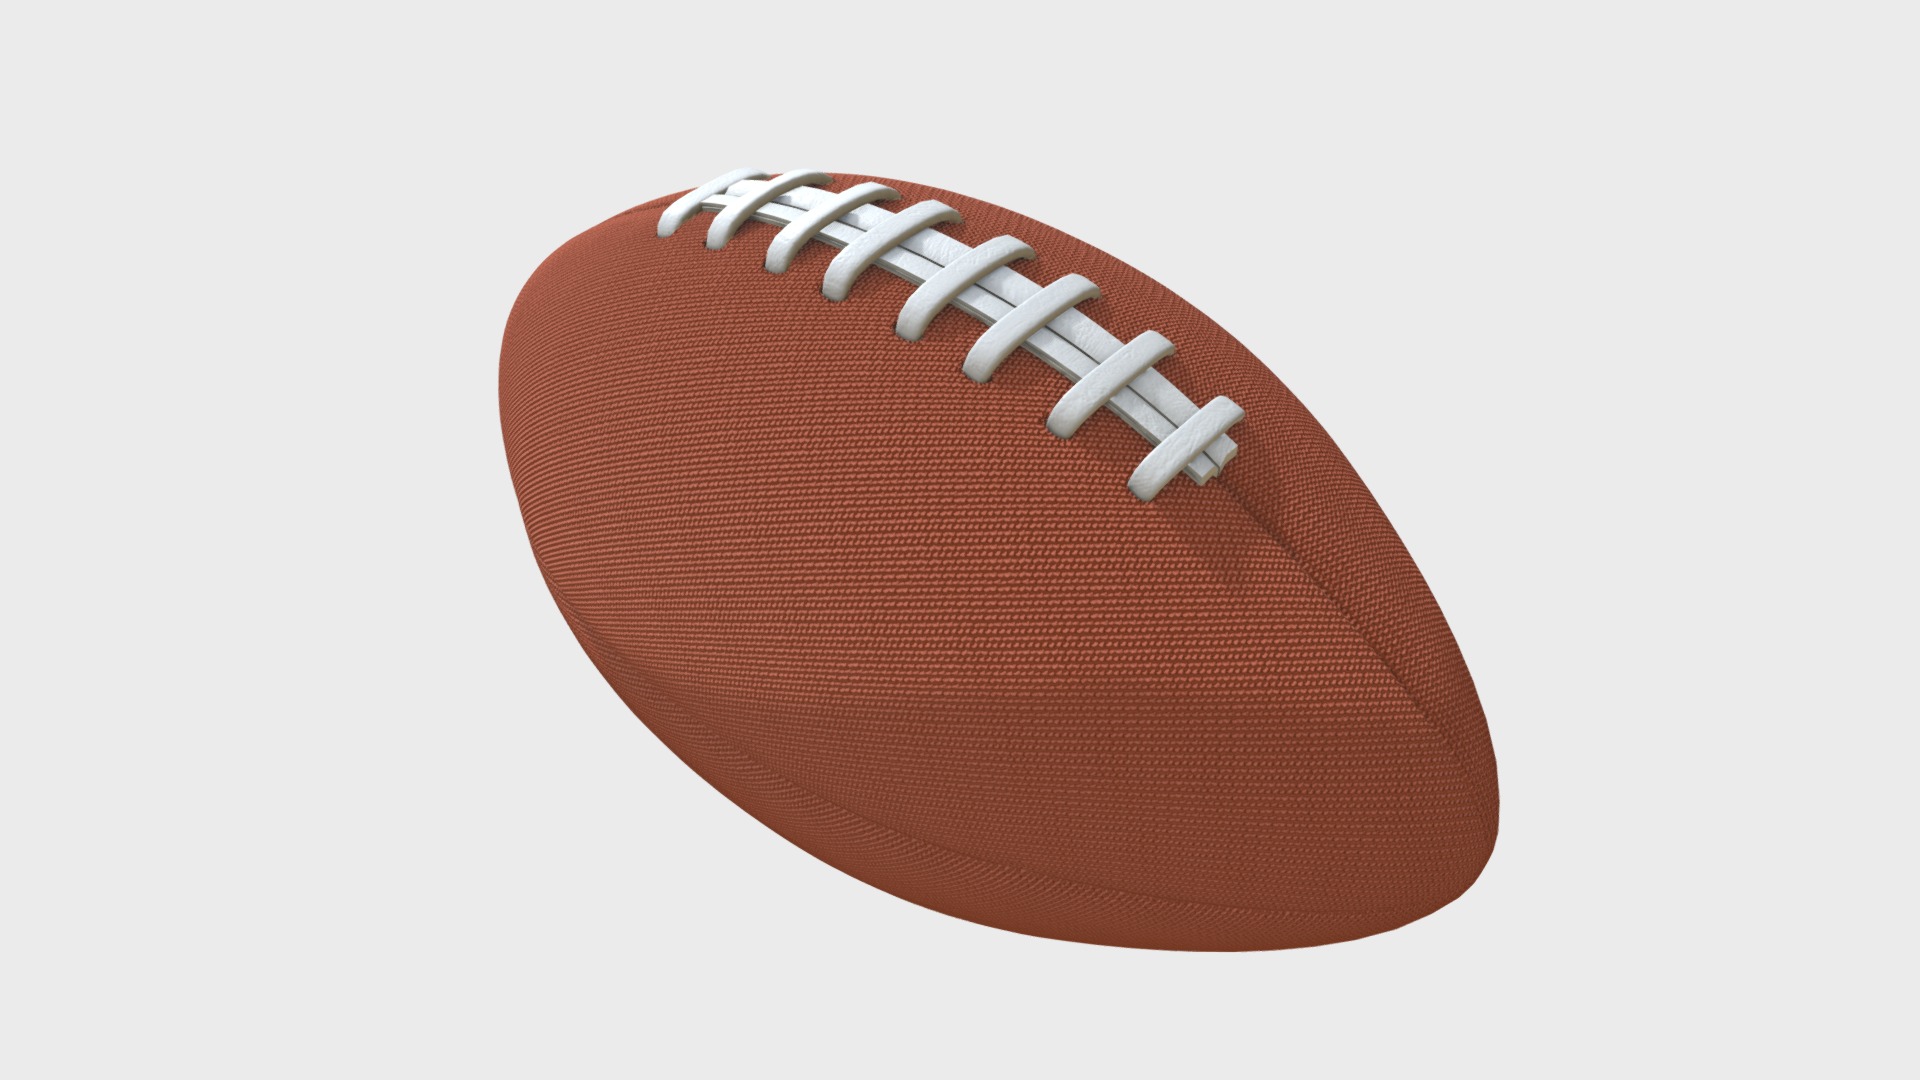 3D model American football ball - This is a 3D model of the American football ball. The 3D model is about a red heart with white string.